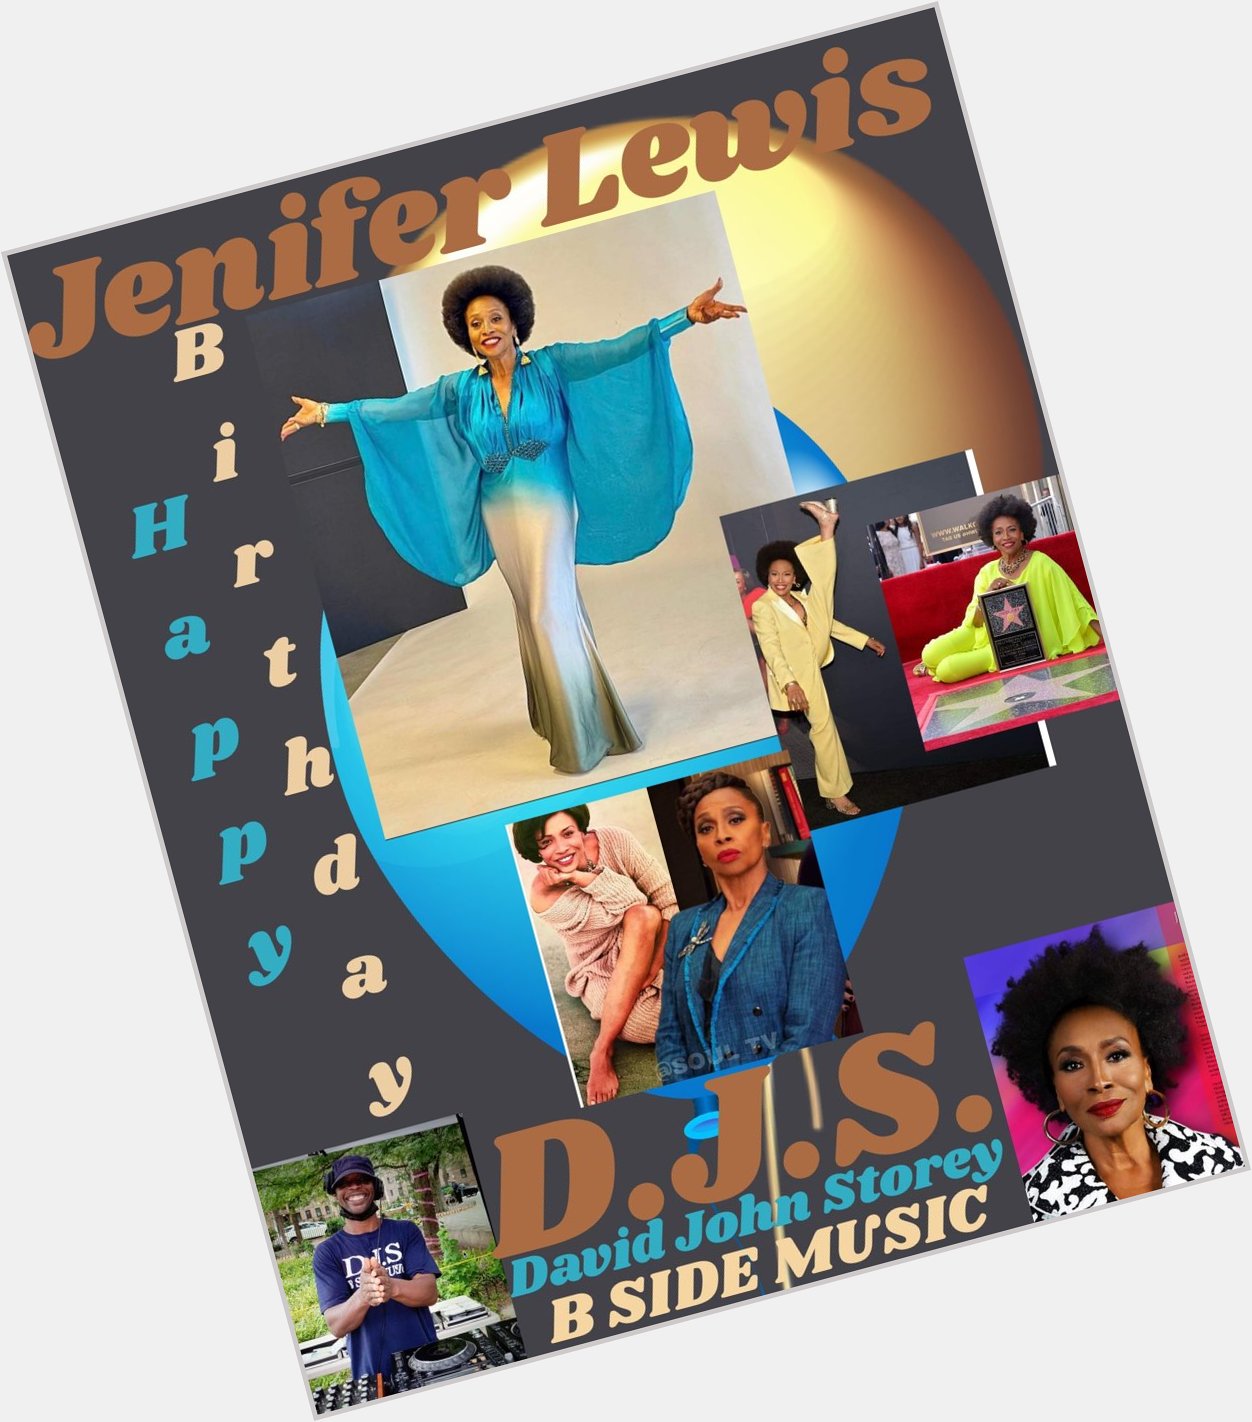 I(D.J.S.)\"B SIDE\" taking time to say Happy Birthday to Actress: \"JENIFER LEWIS\"!!!! 